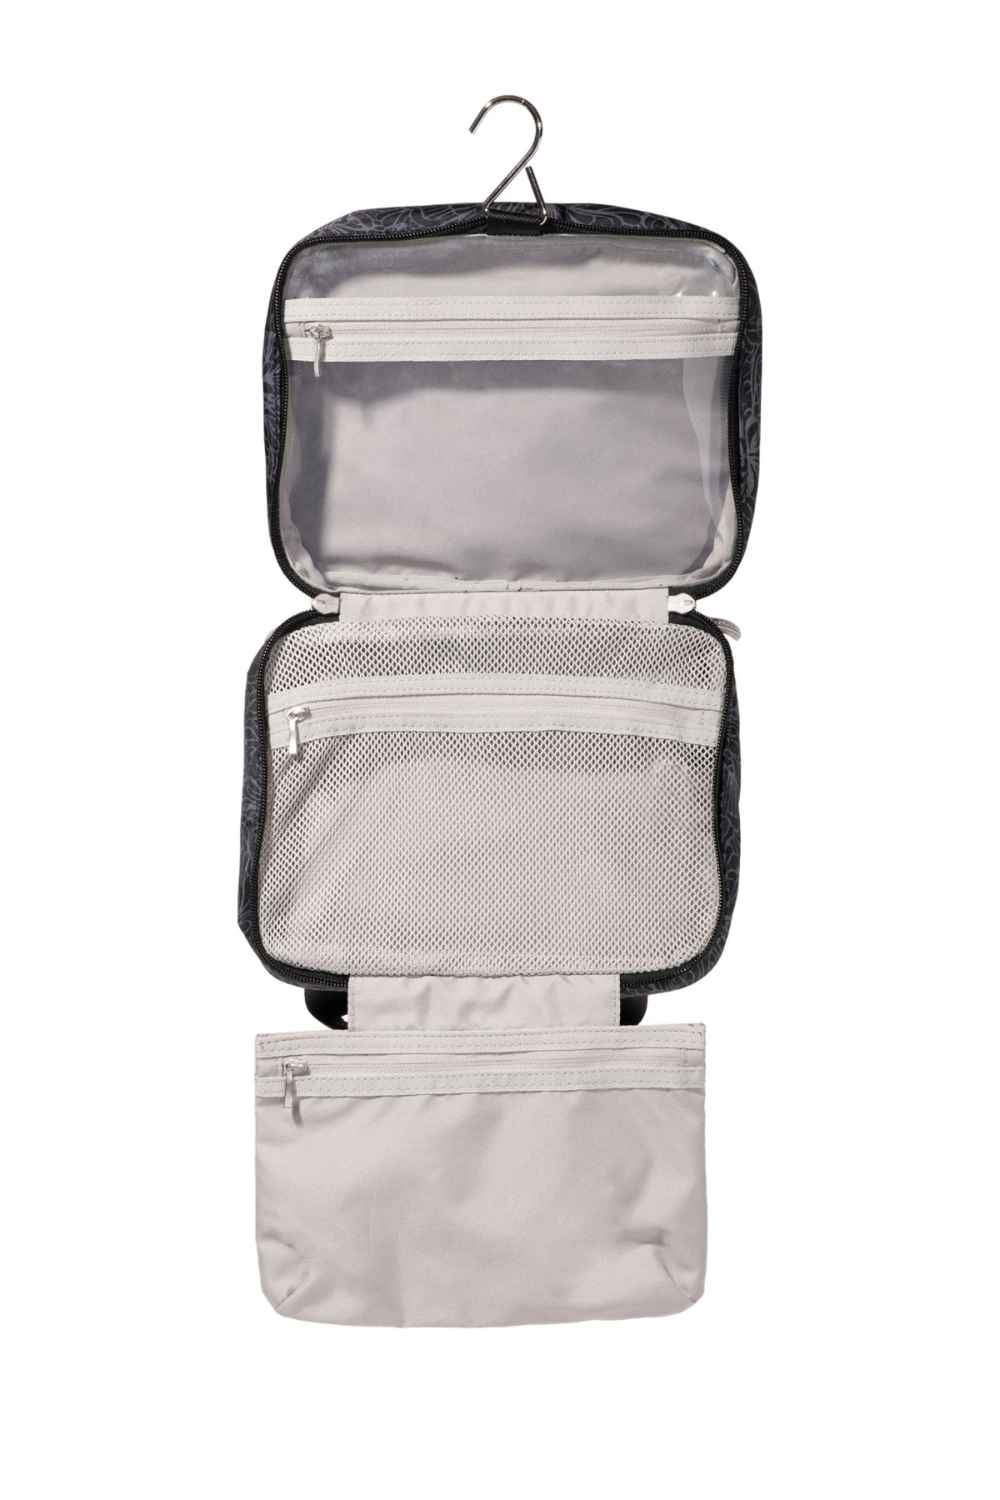 Baggallini Hanging Travel Toiletry Kit | Midnight Blossom